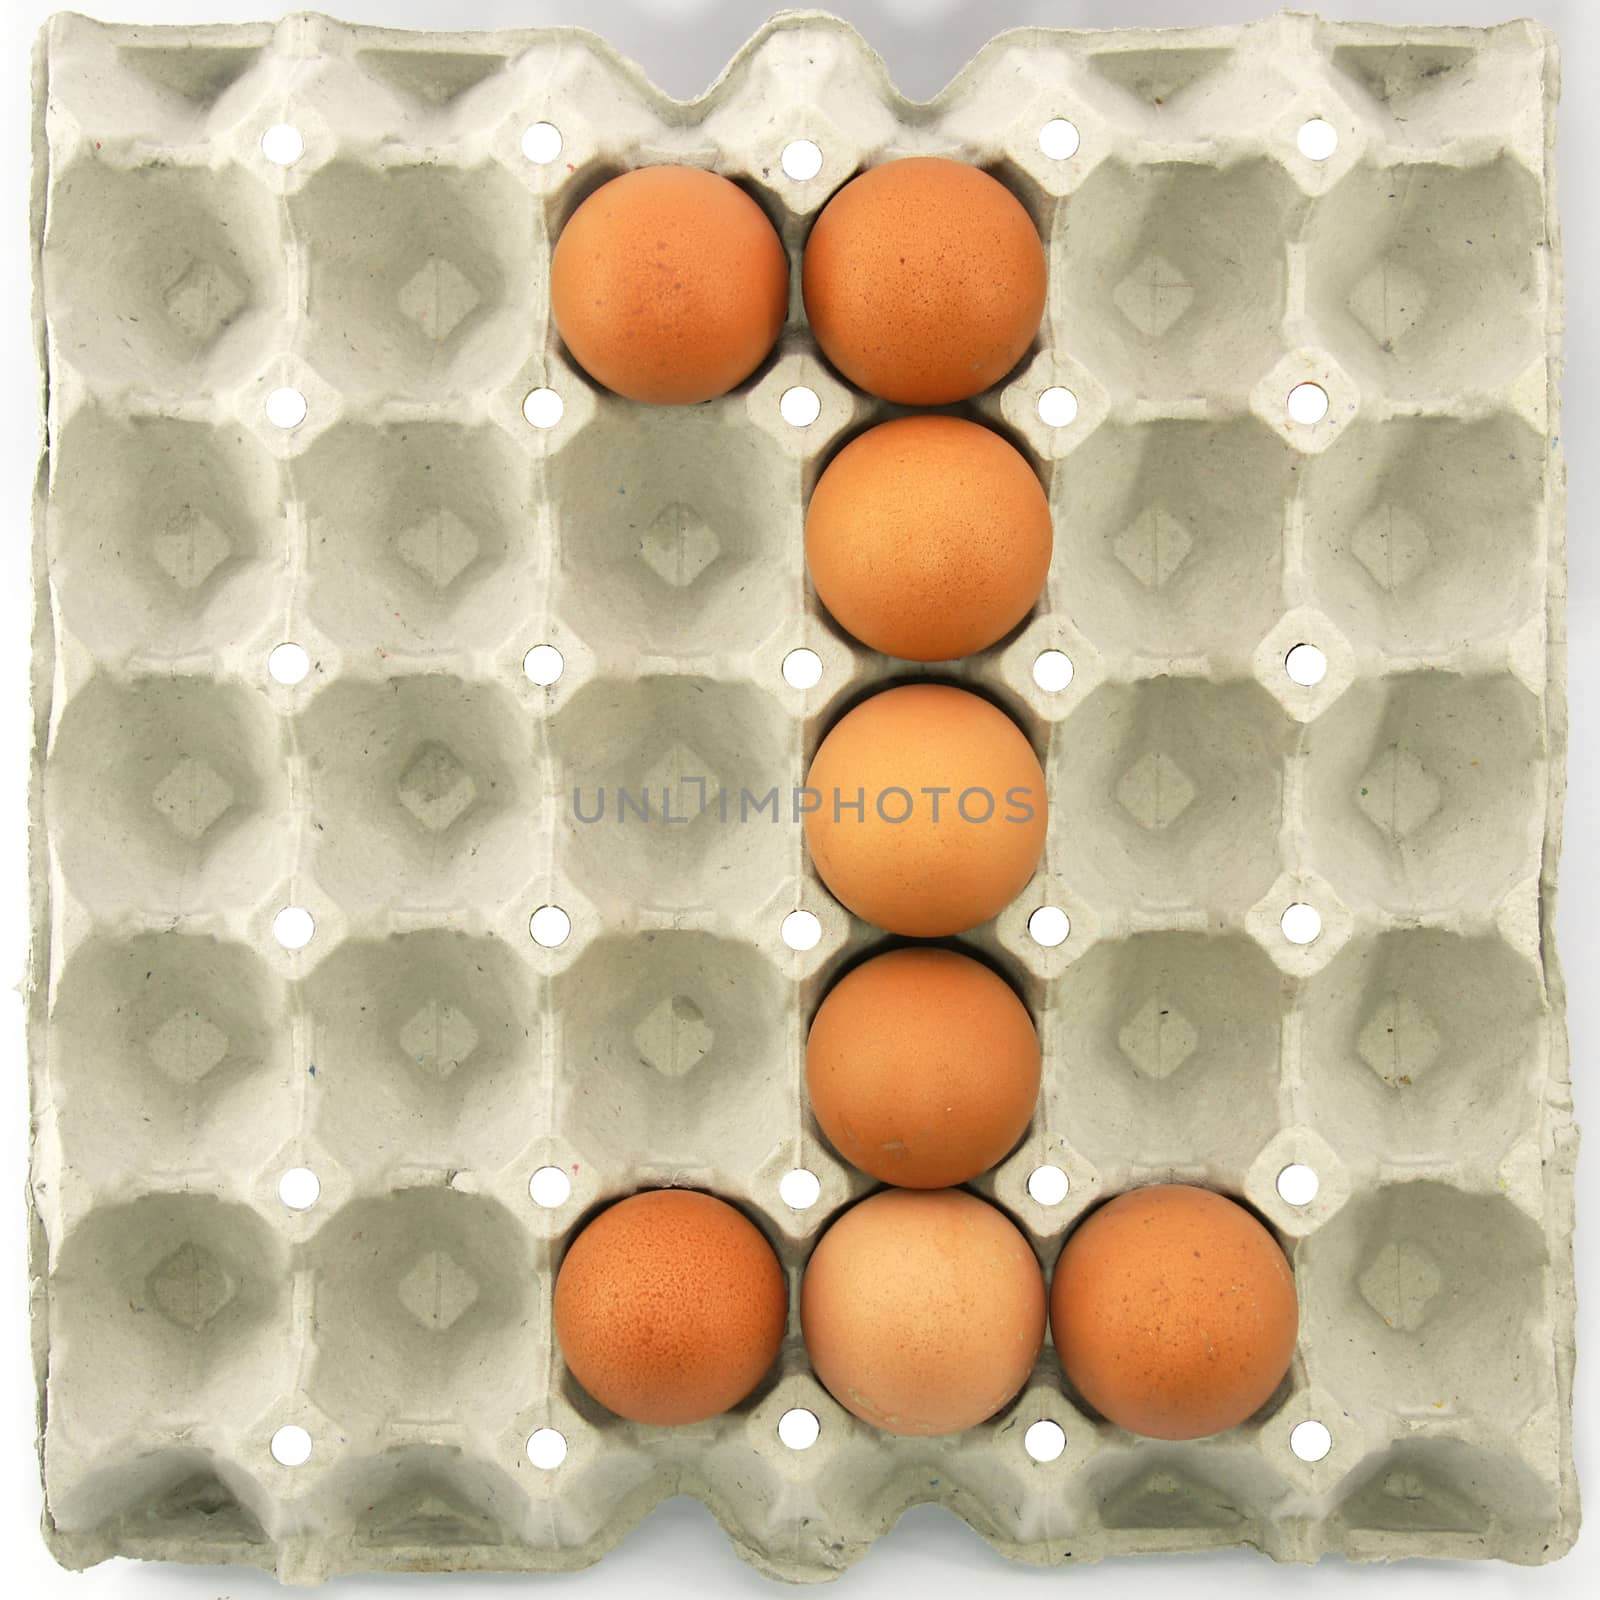 Number one of eggs in the paper package tray